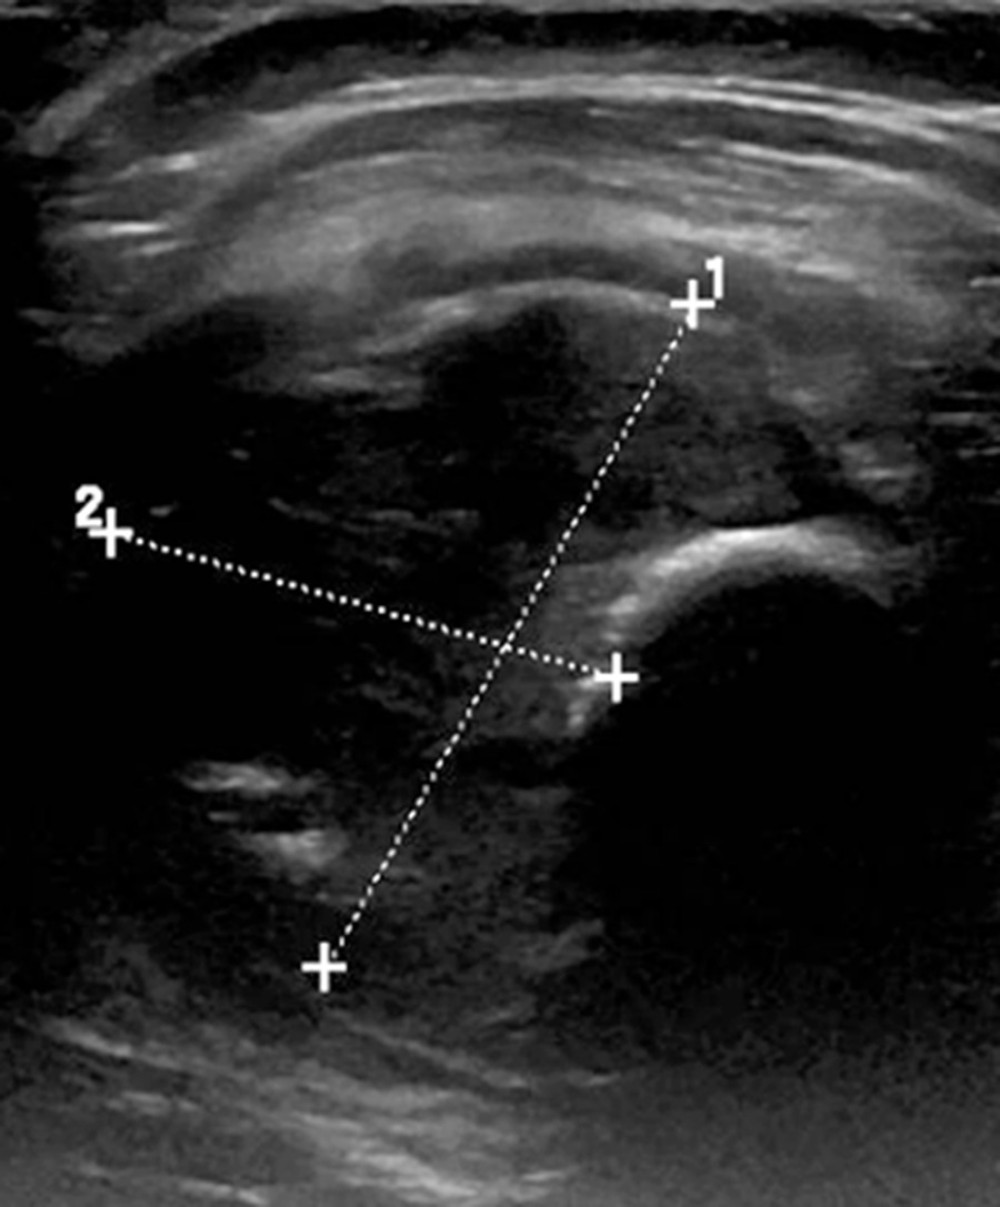 Ultrasound image showing the mass as a hypoechoic lesion with foci of calcification.